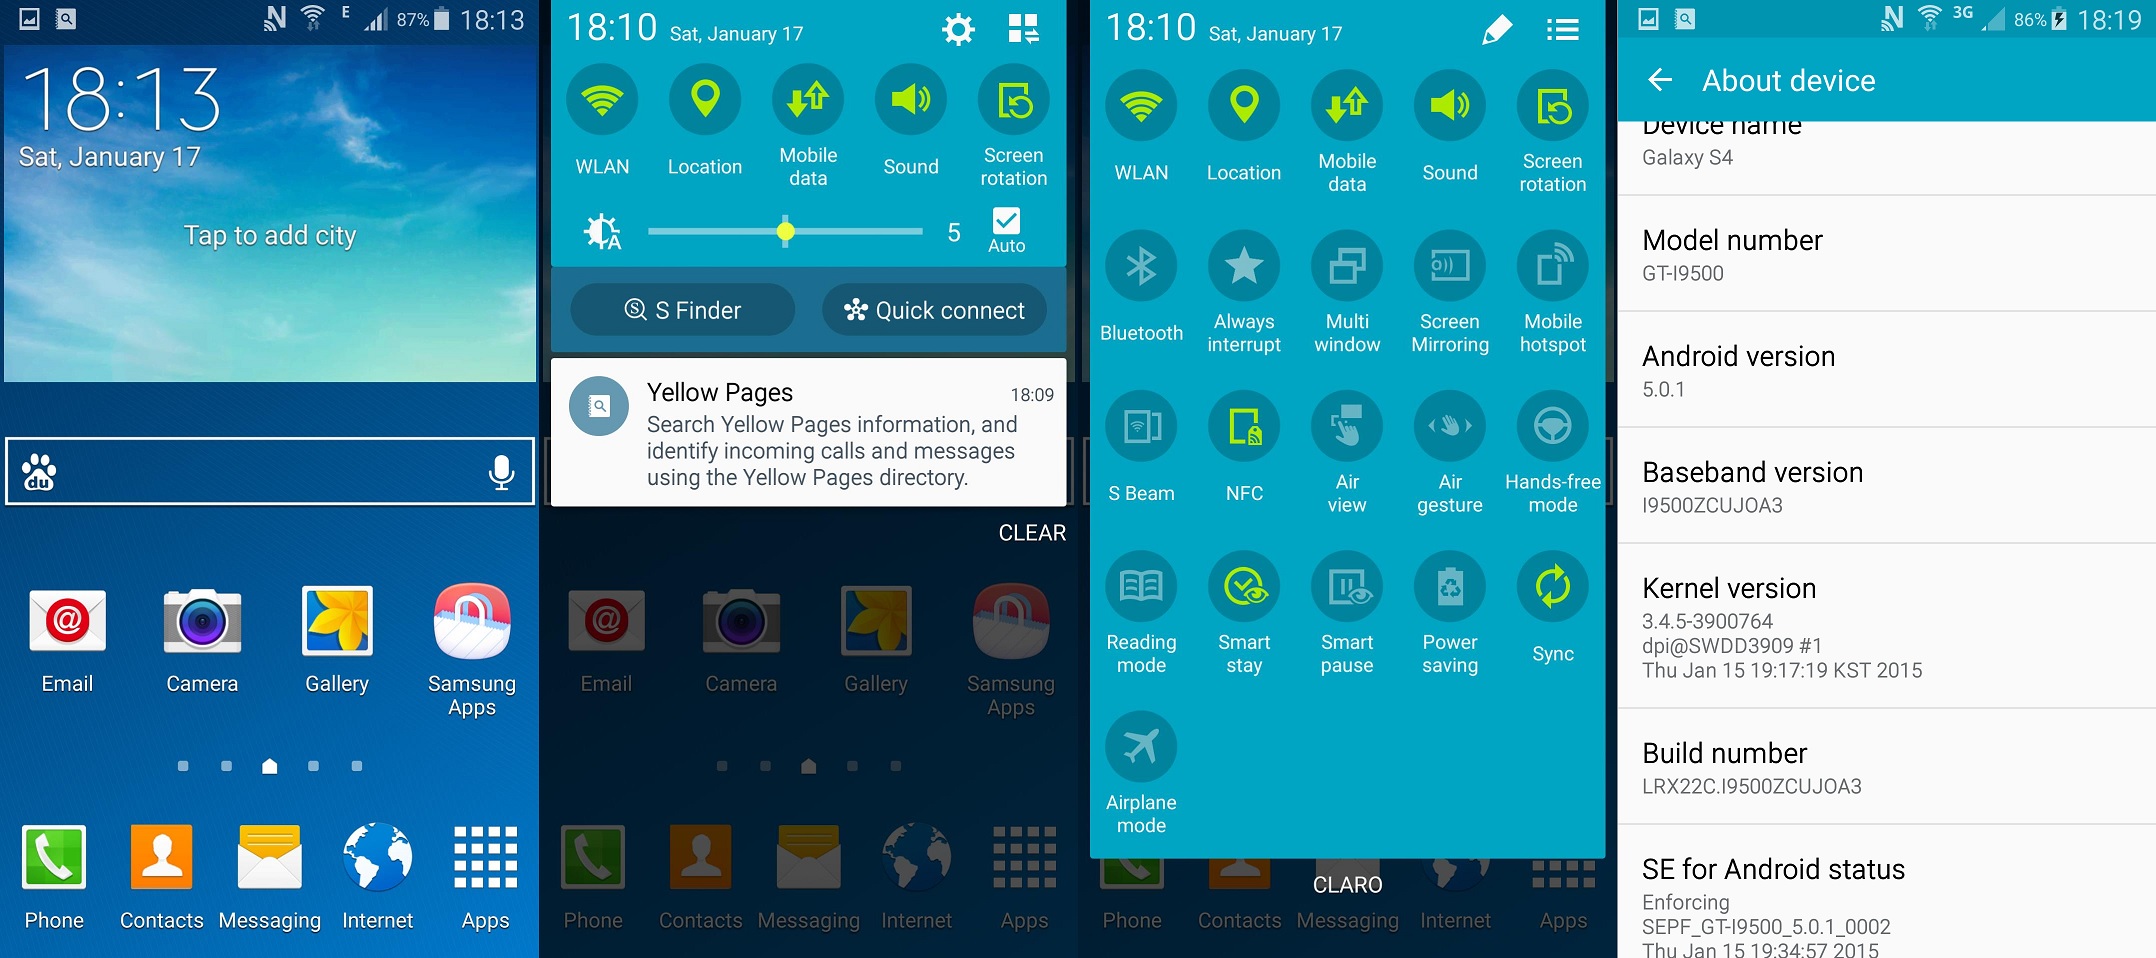 download android 5.1 lollipop for galaxy s4